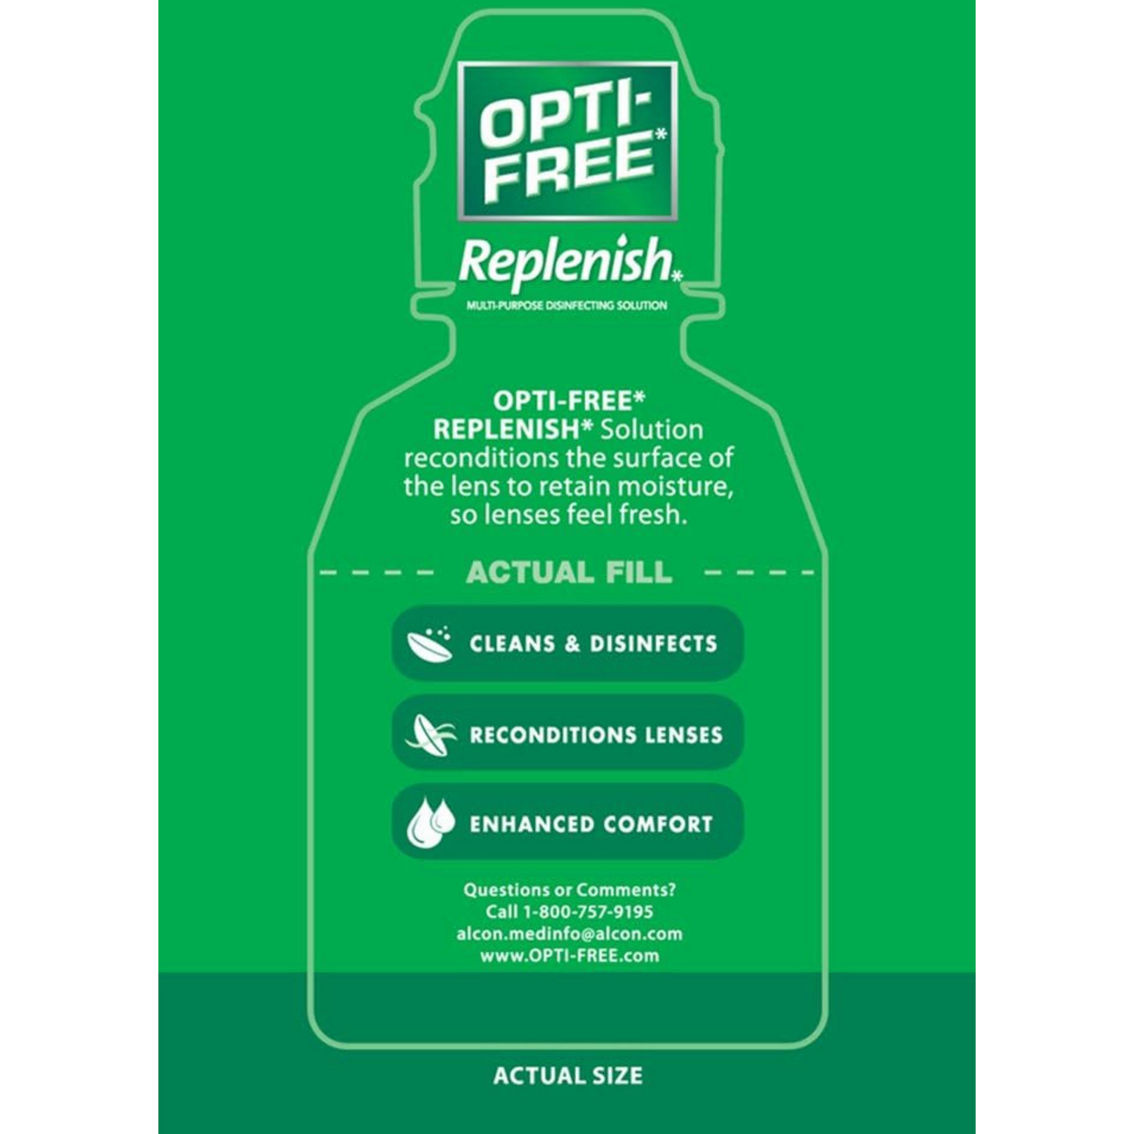 Optic-Free Replenish Multi Purpose Disinfectant Eye Solution 2 oz. with Lens Case - Image 2 of 2